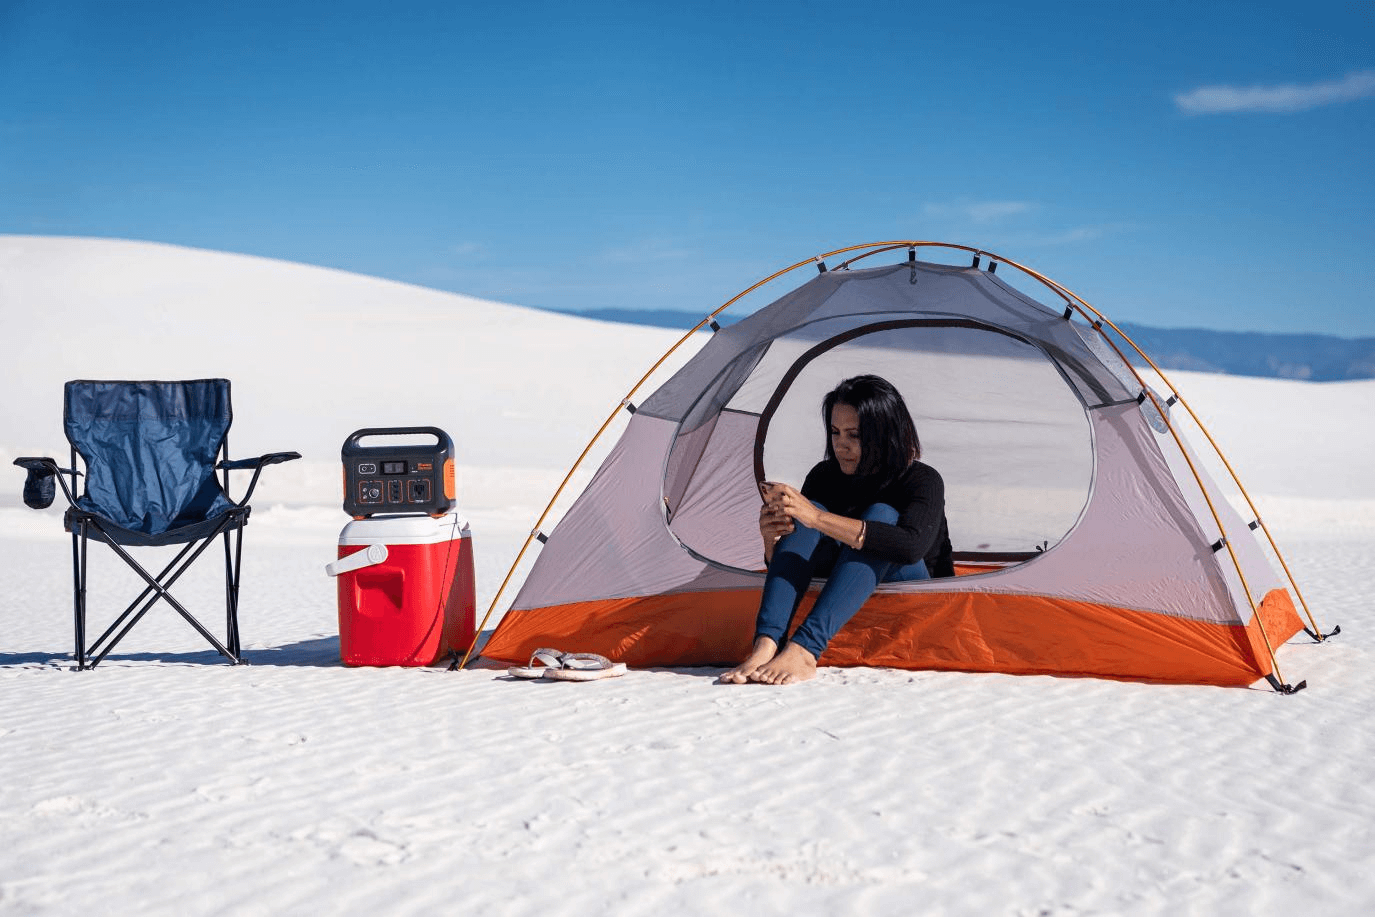 This Company's Portable Coffee Maker Is Perfect for Campers and Tailgaters